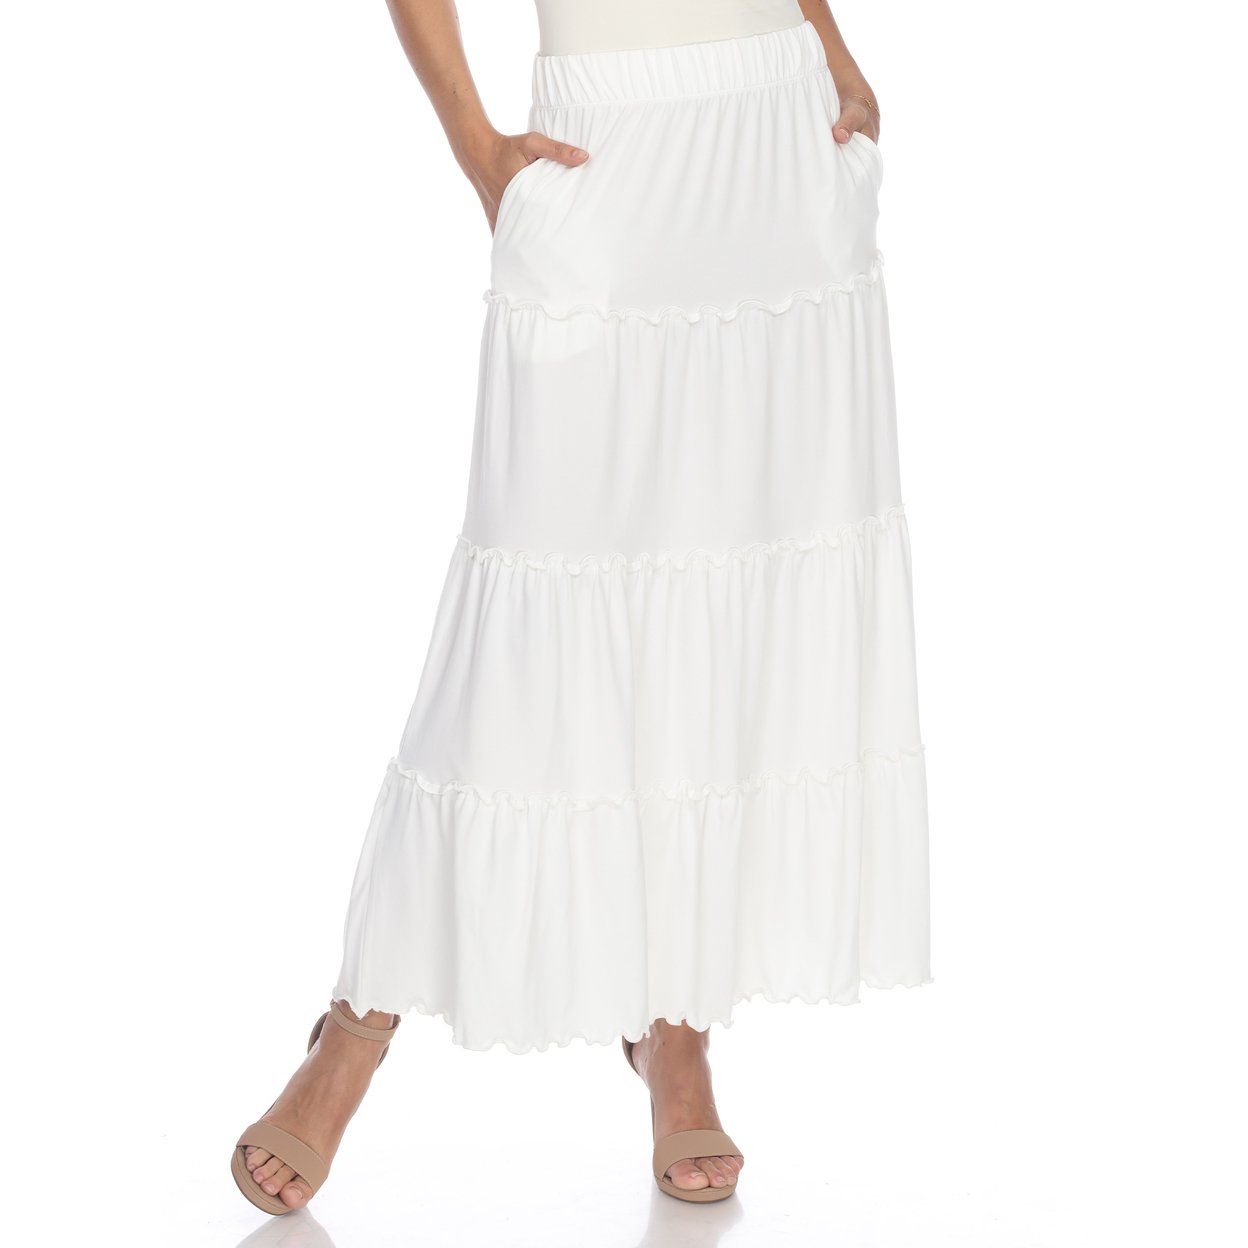 White Mark Women's Tiered Maxi Skirt With Pockets - White, Large